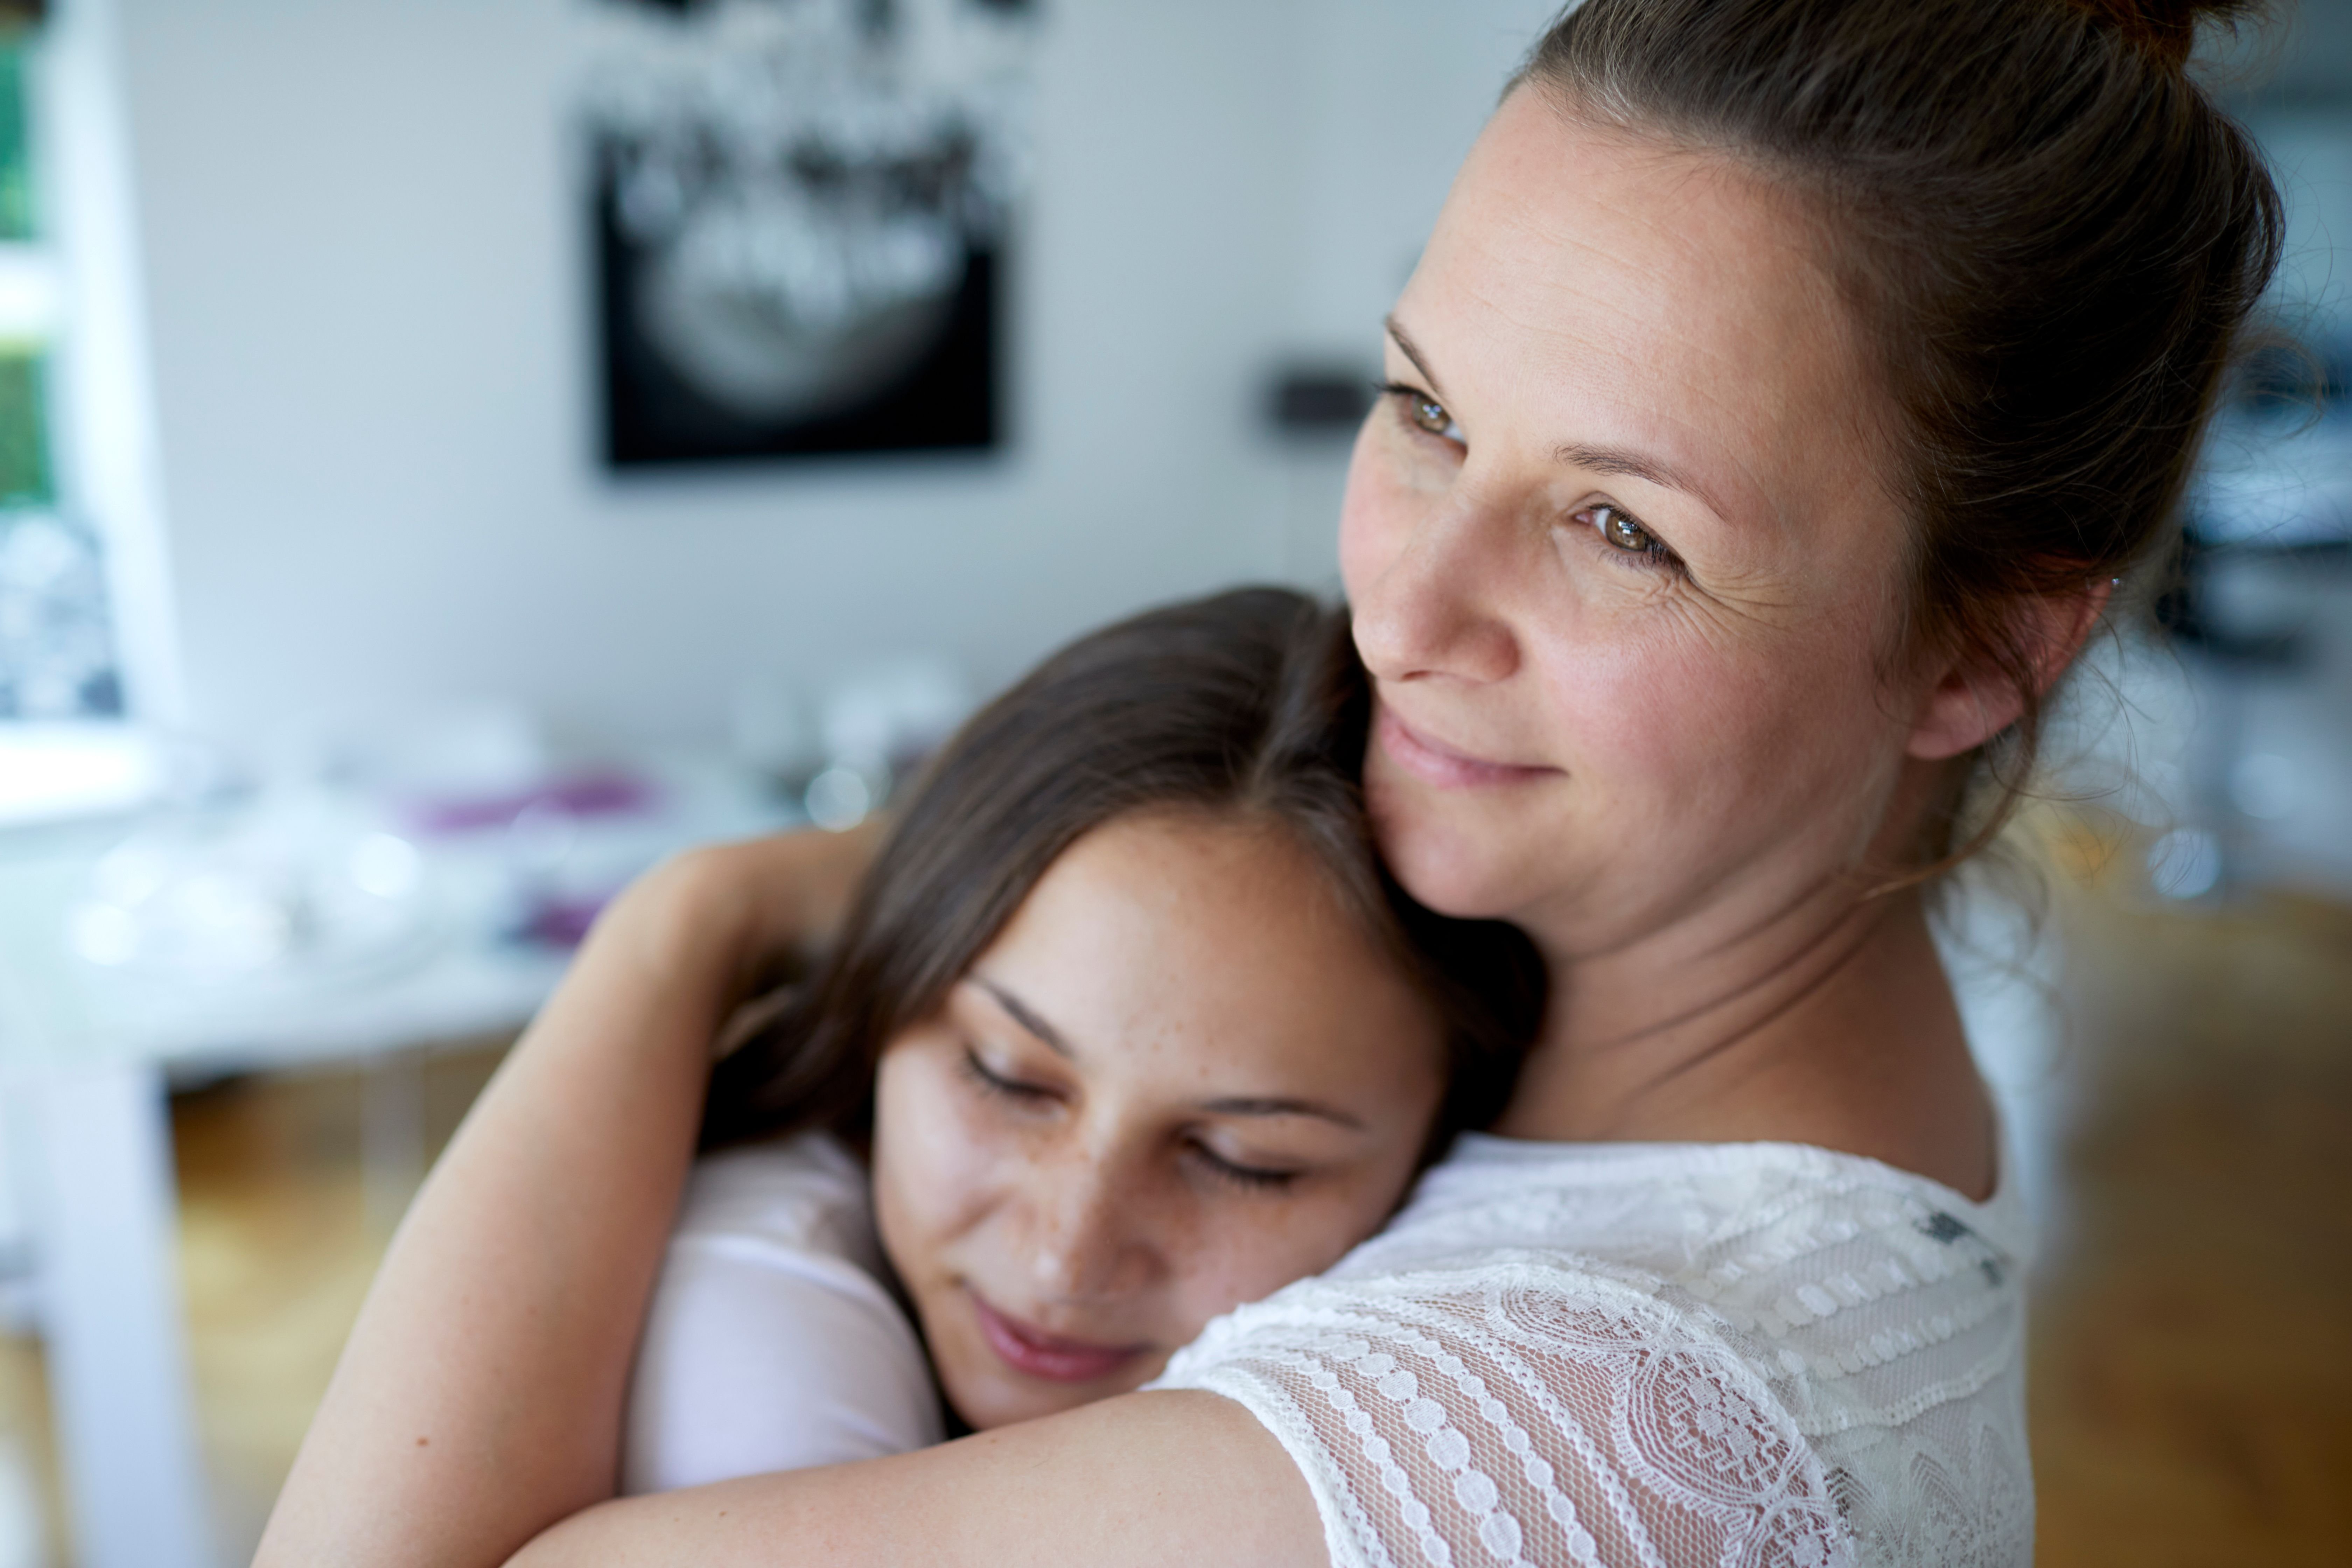 A mother and daughter hugging each other. | Source: Shutterstock